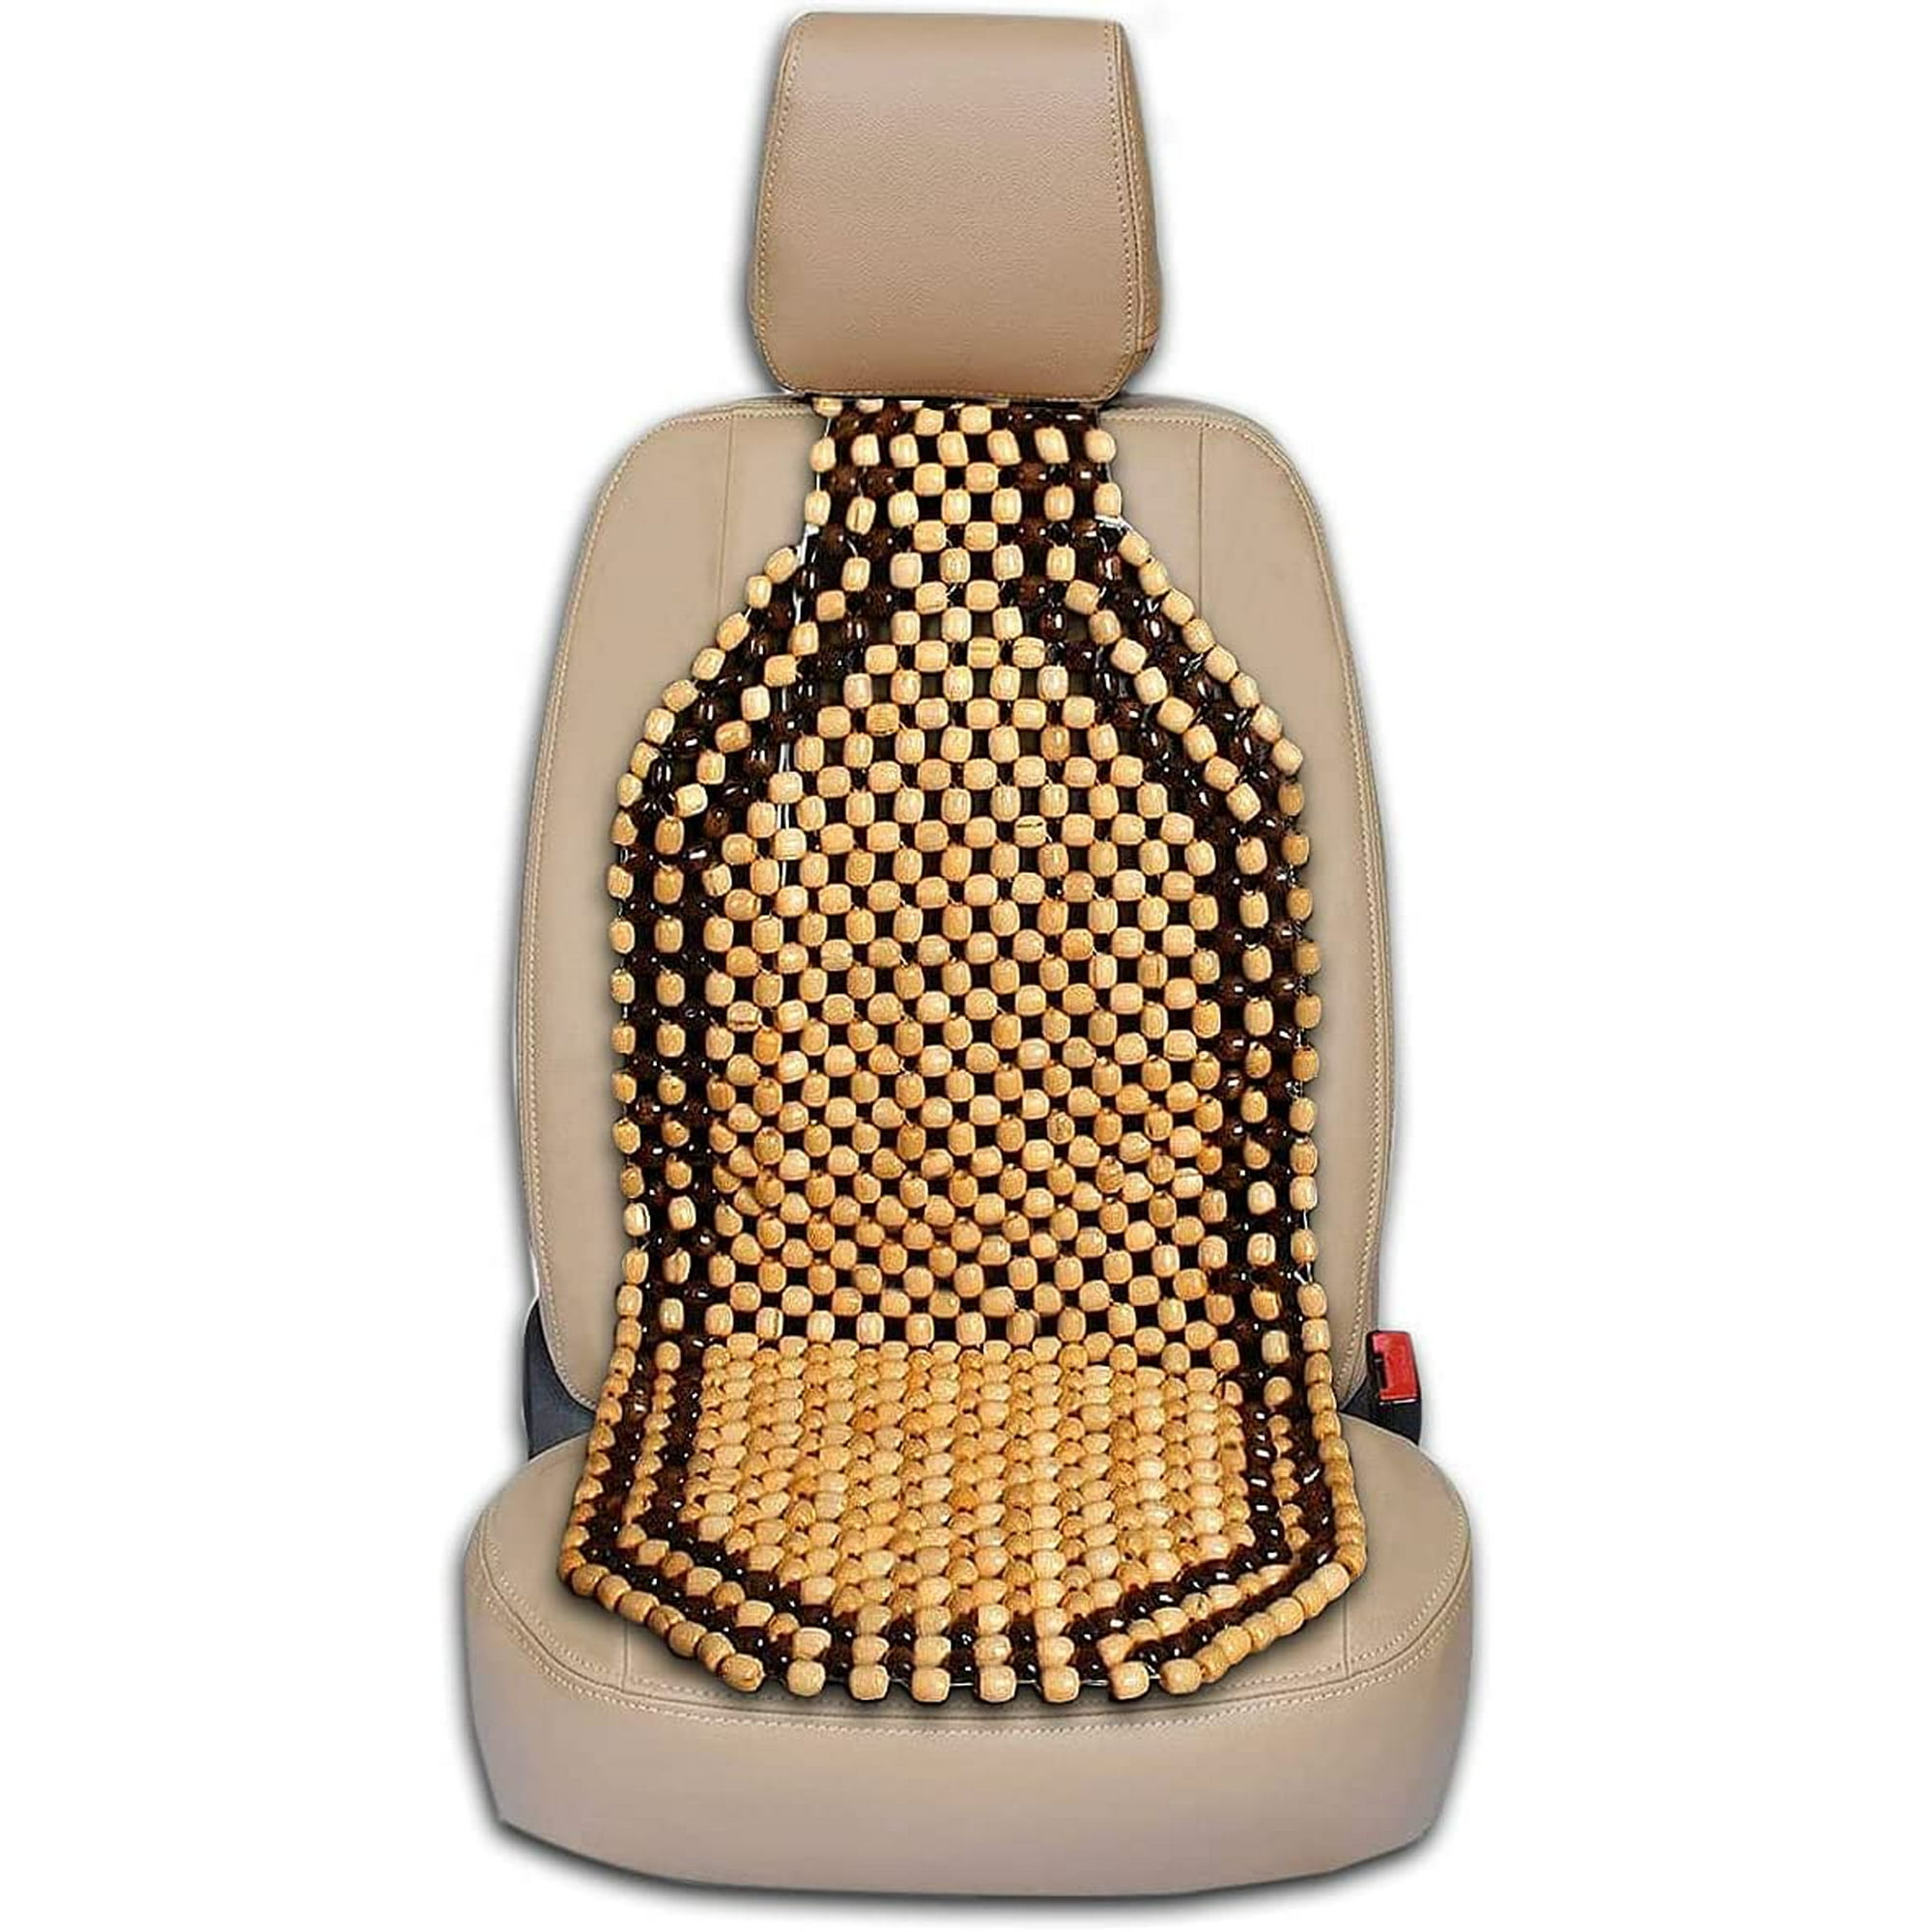 Tech Car Seat Back Support with Wood Beads Back Cushion Car Accessories - Walmart.com